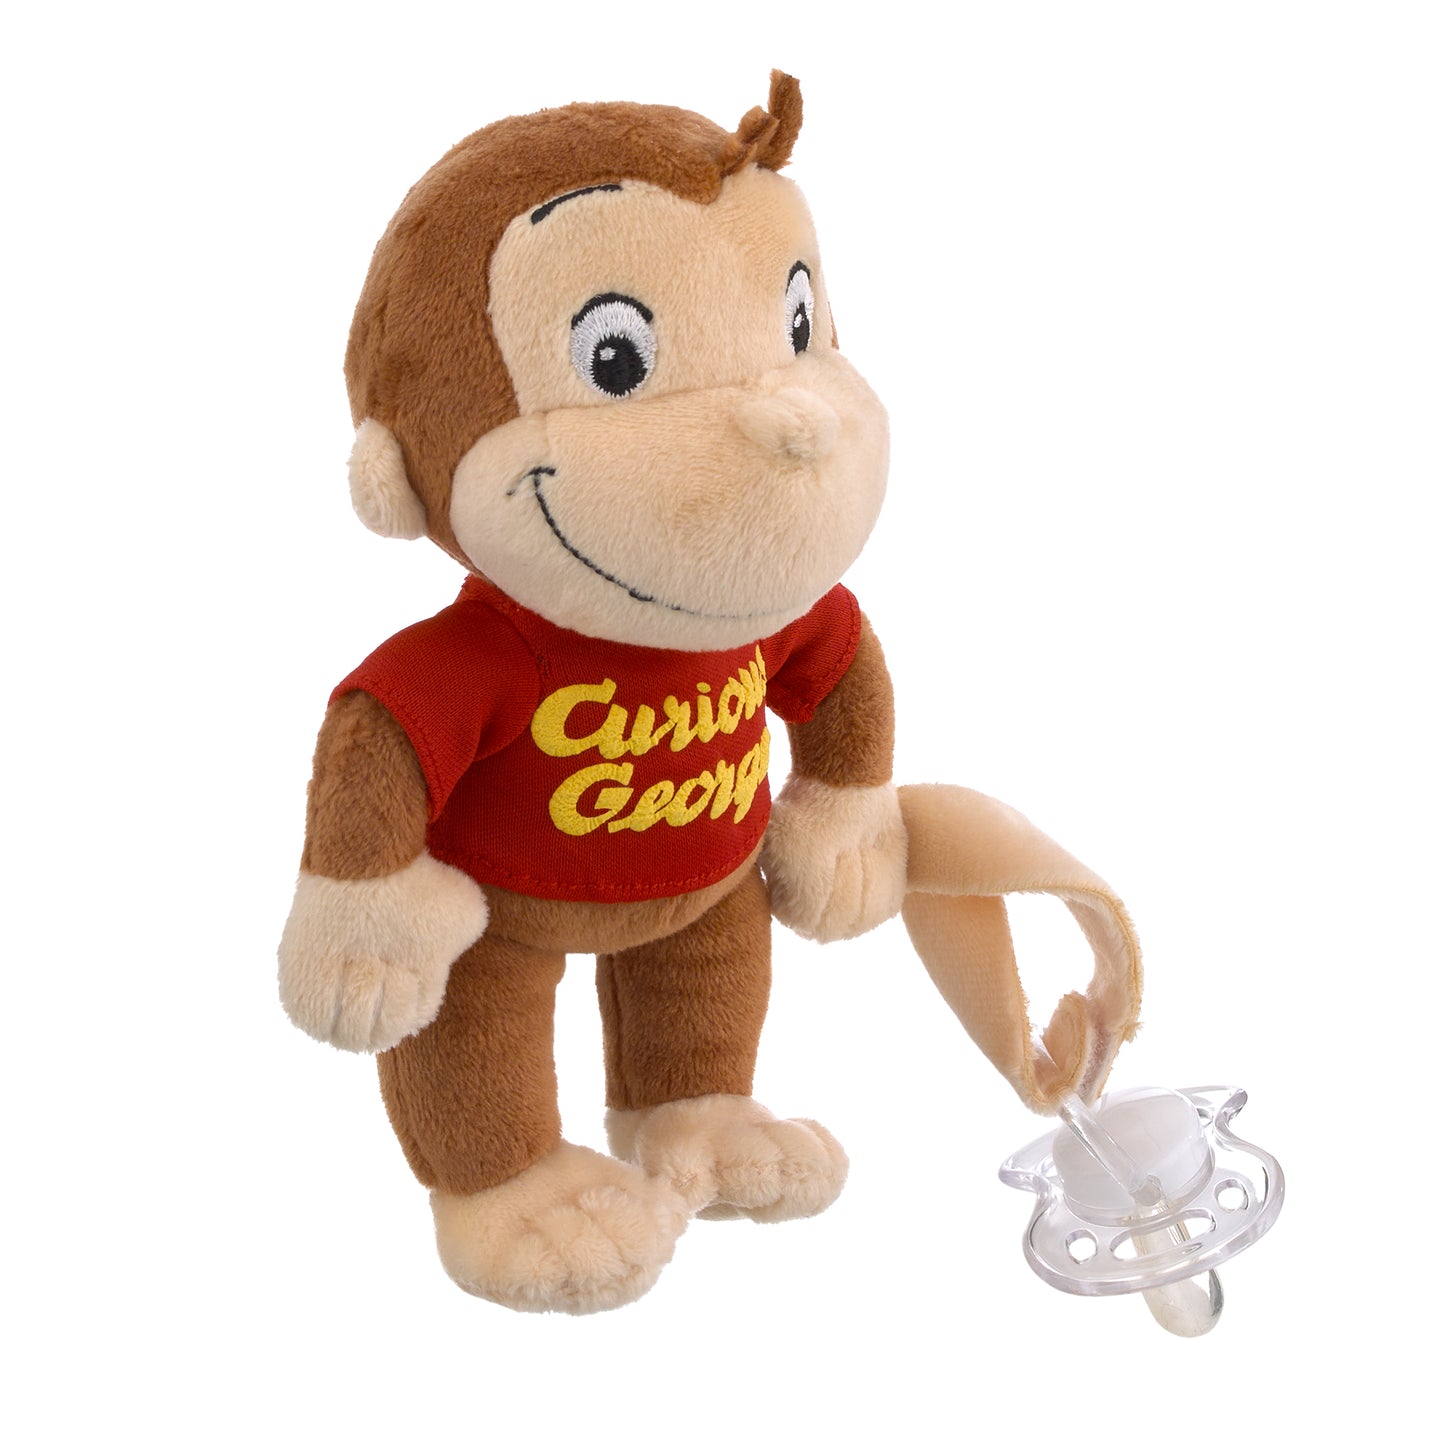 Welcome to the Universe Baby Curious George Brown, Red and Yellow Plush Pacifier Buddy